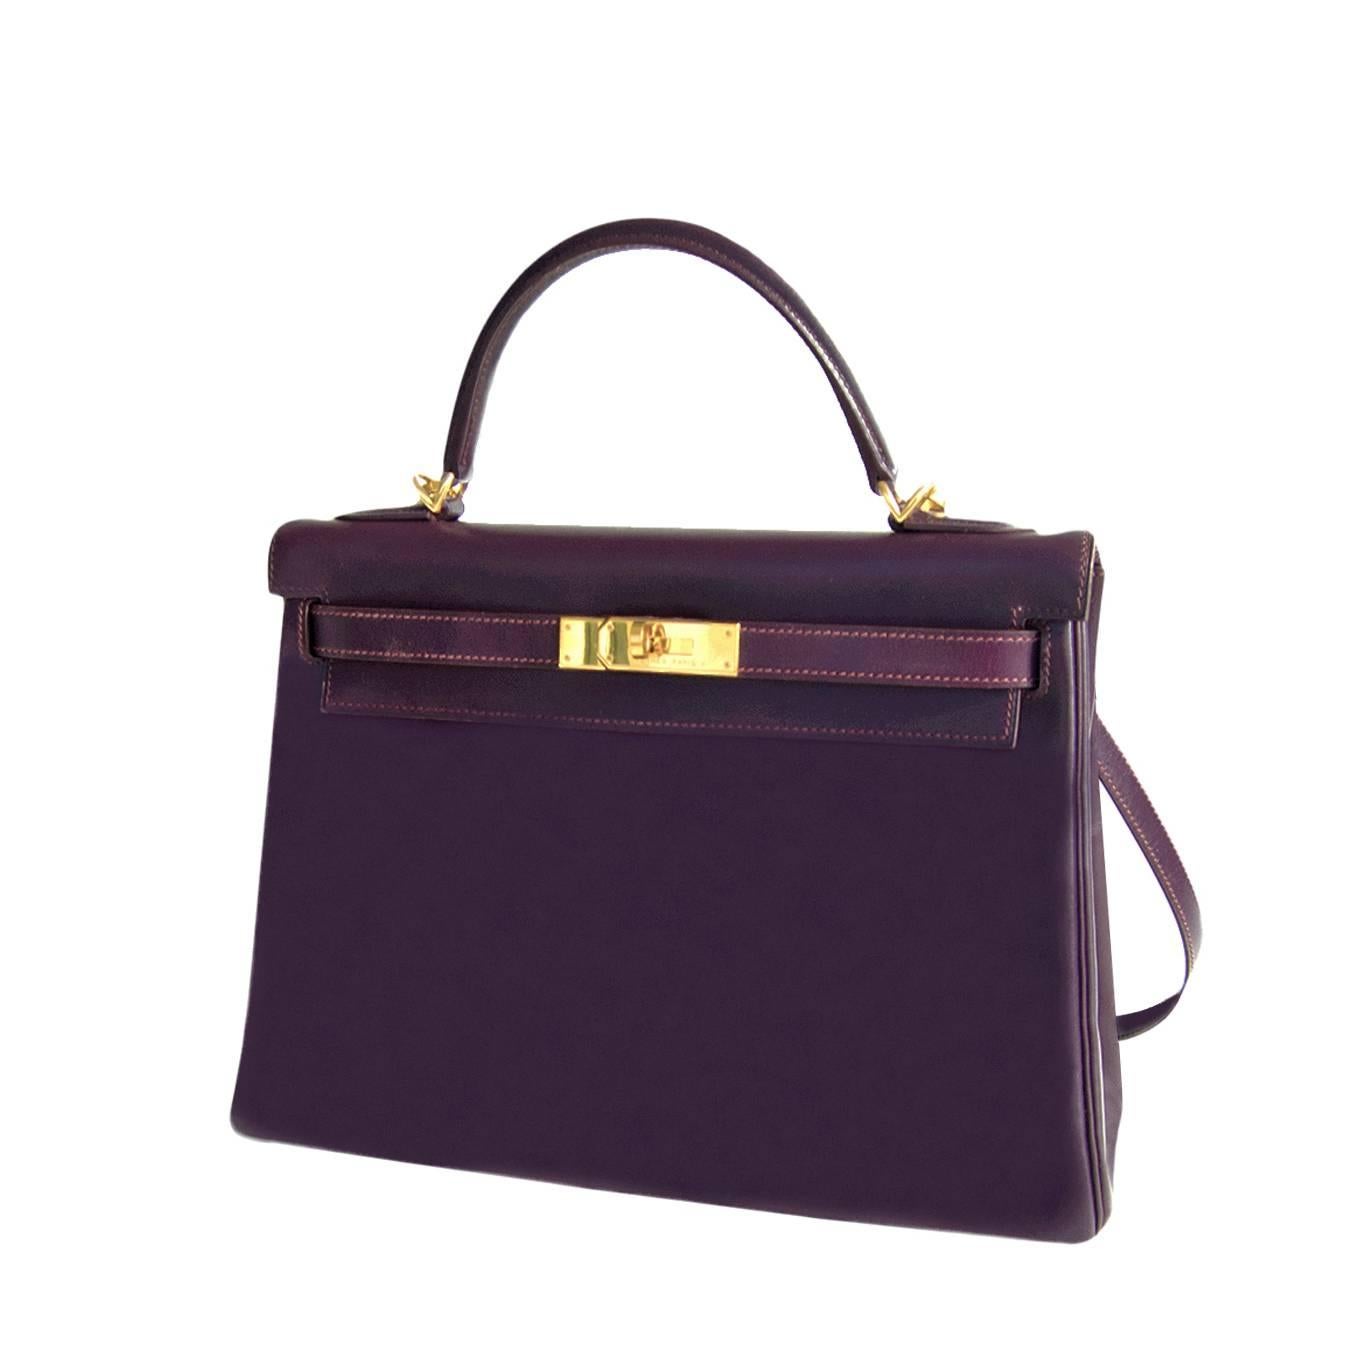 Hermes Raisin Box Kelly Retourne 32cm Gold Hardware GHW Shoulder Bag
Raisin in Box Leather is a very sought-after color
A fabulous purple that is bright but very versatile 
The Box leather is in fabulous condition with a gorgeous patina
So